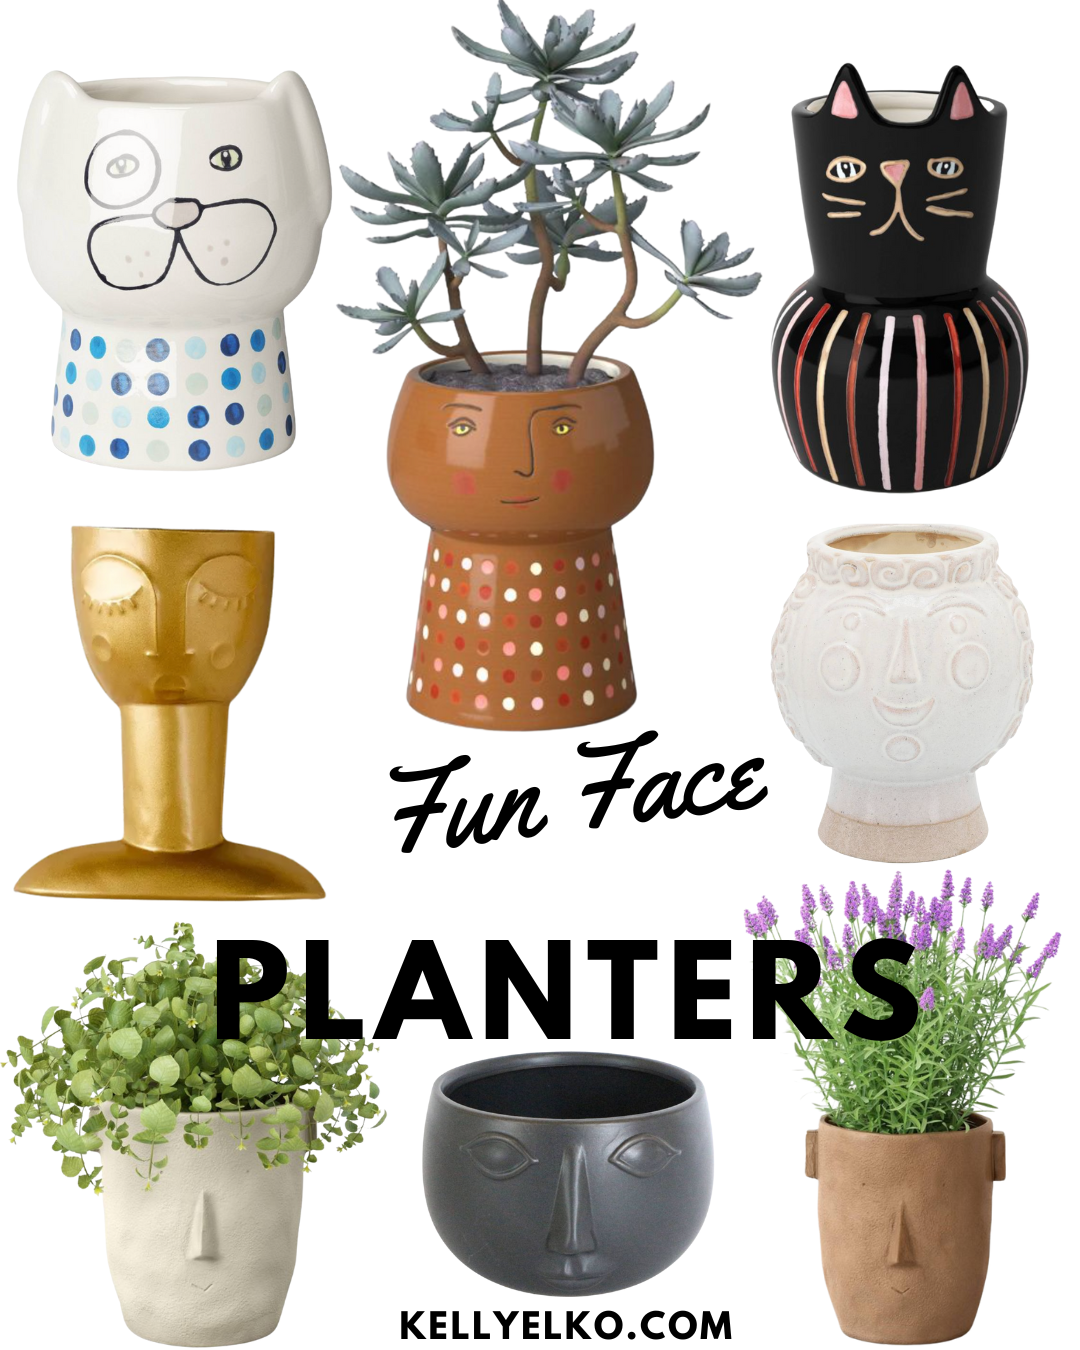 Best and most whimsical head planters / vases kellyelko.com face planters